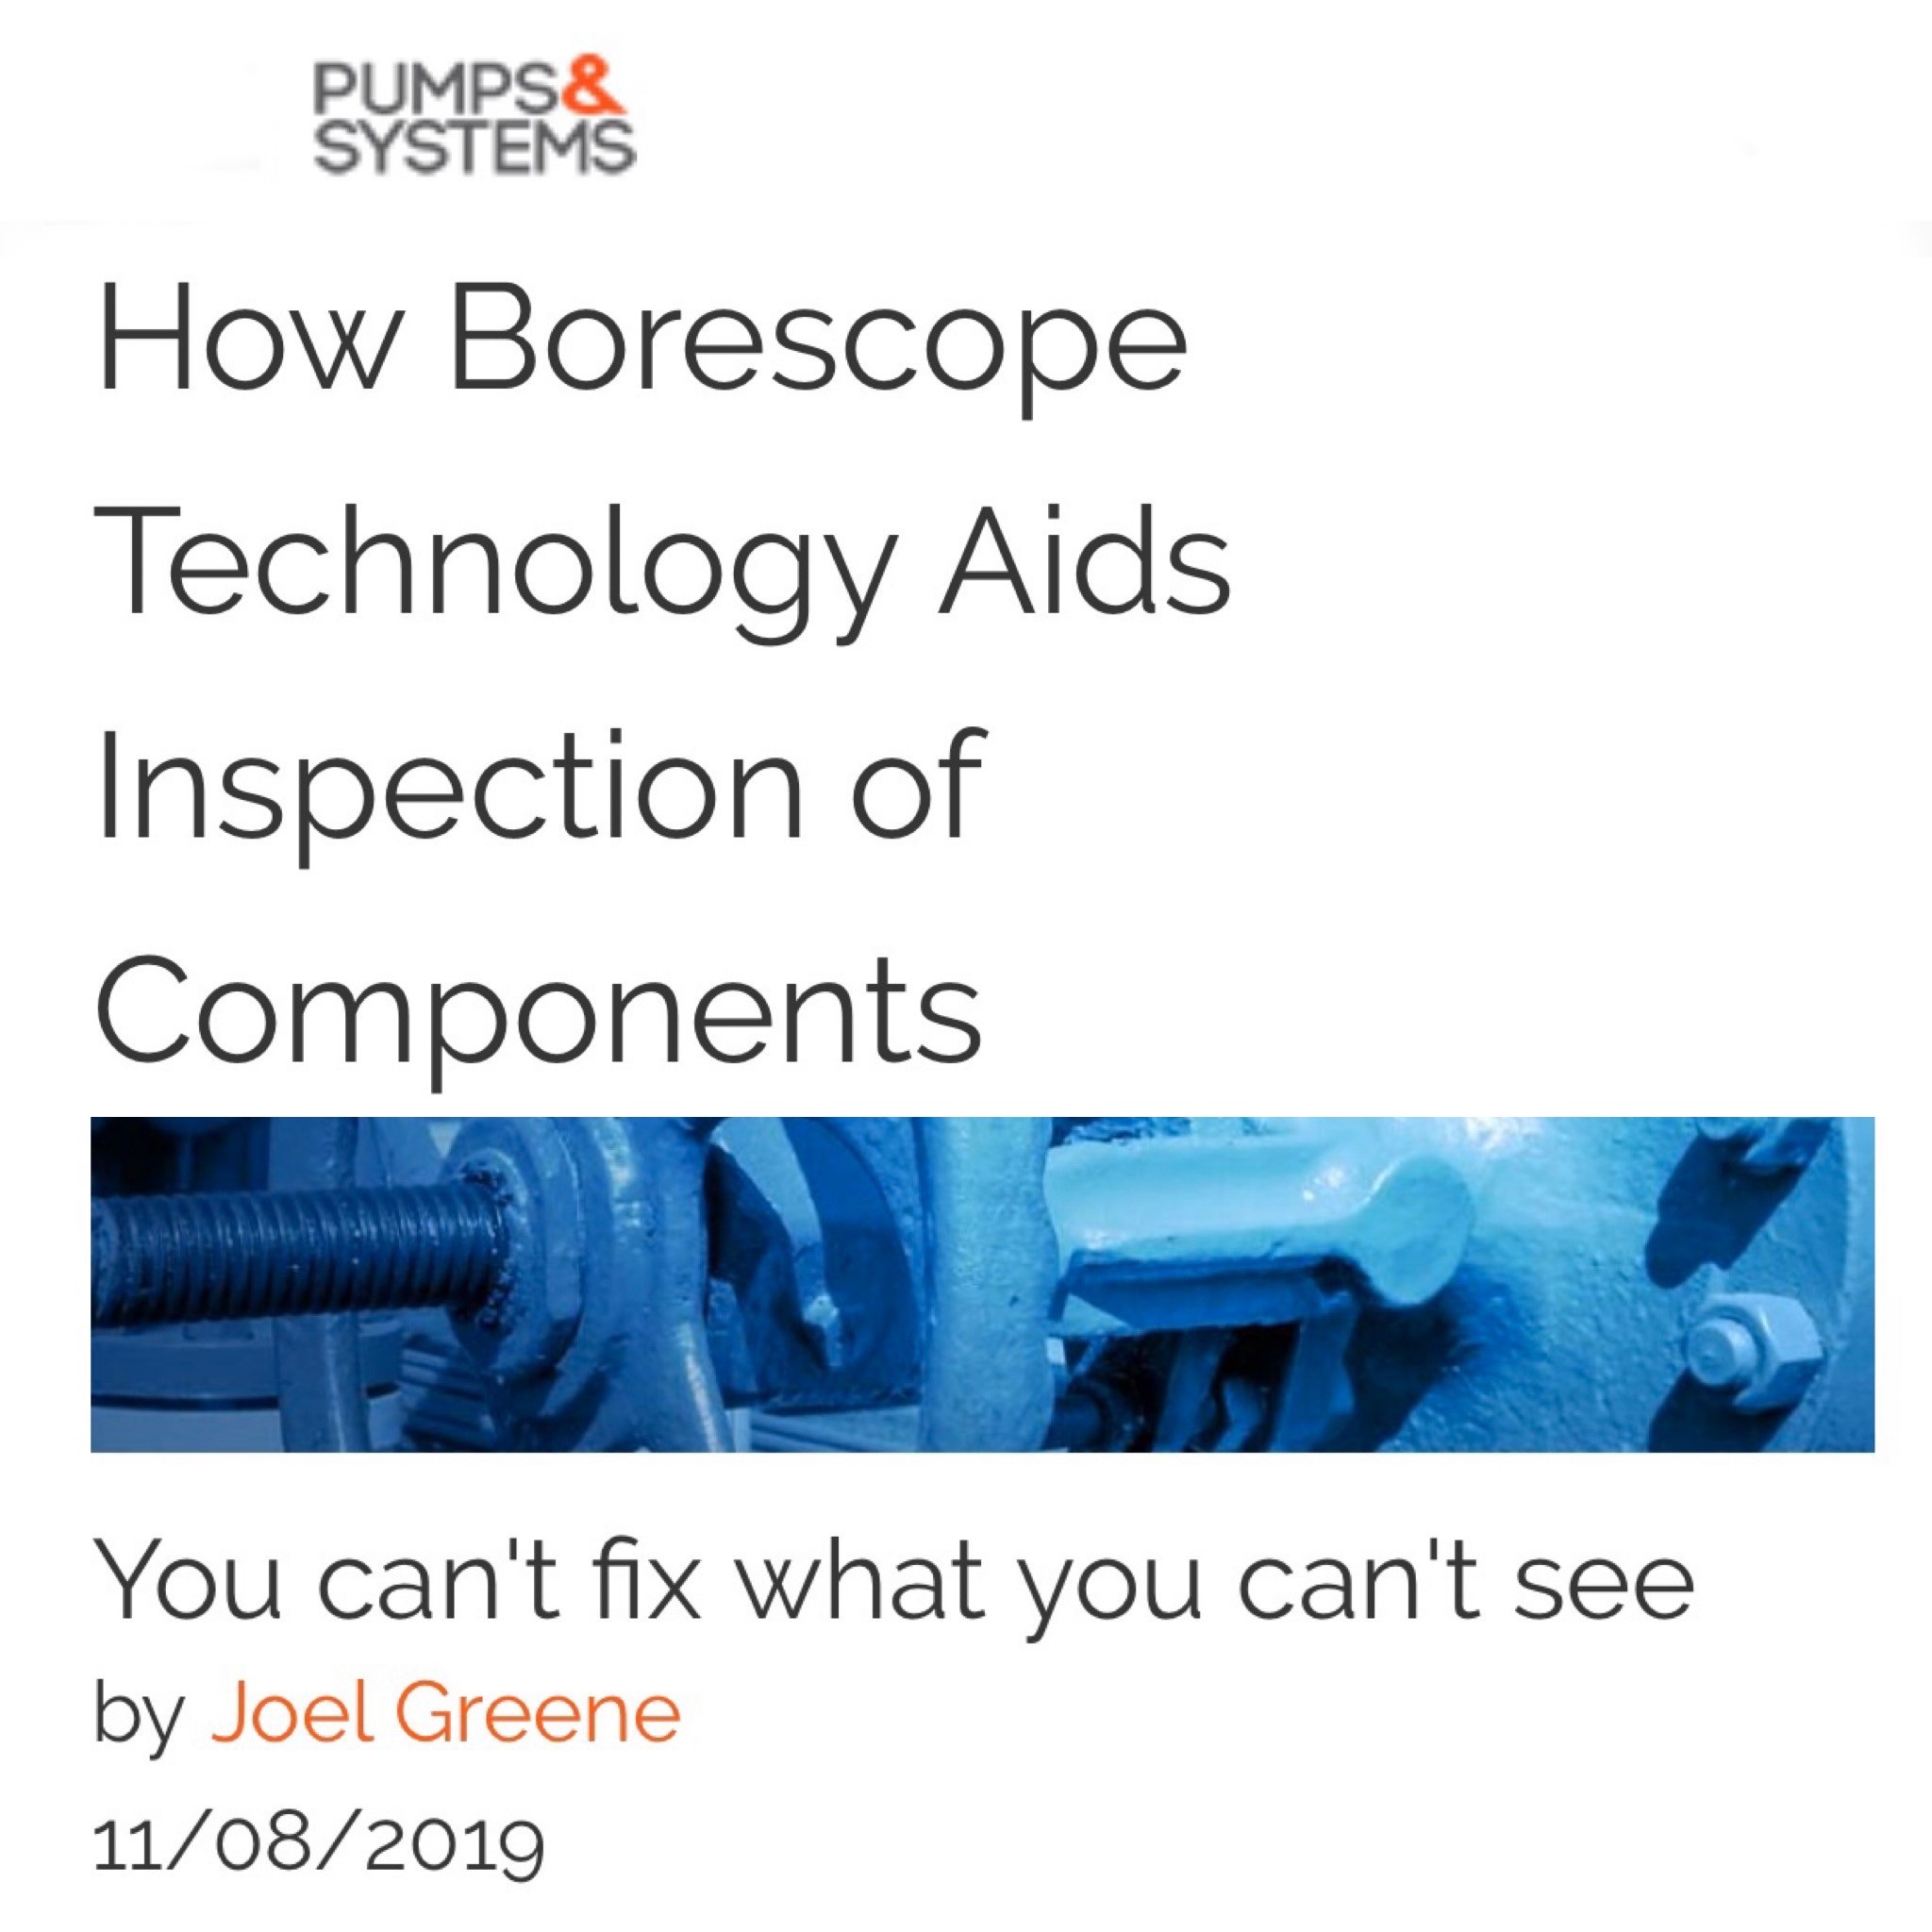 Pumps & Systems How Borescope Technology Aids Inspection of Components